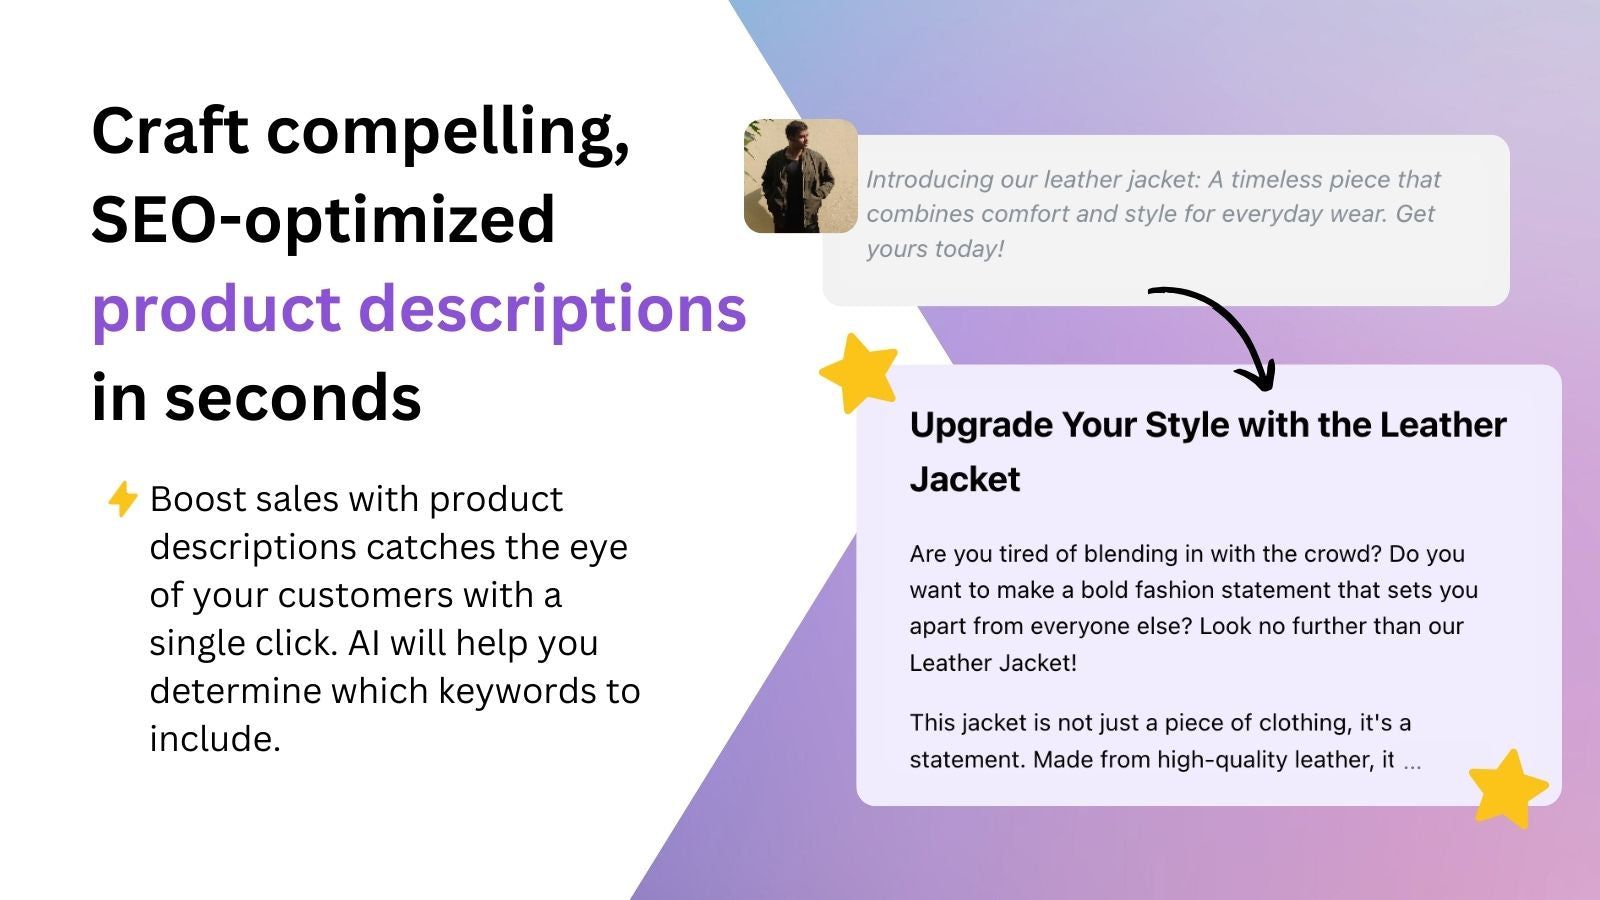 Craft compelling, SEO-optimized product descriptions in seconds